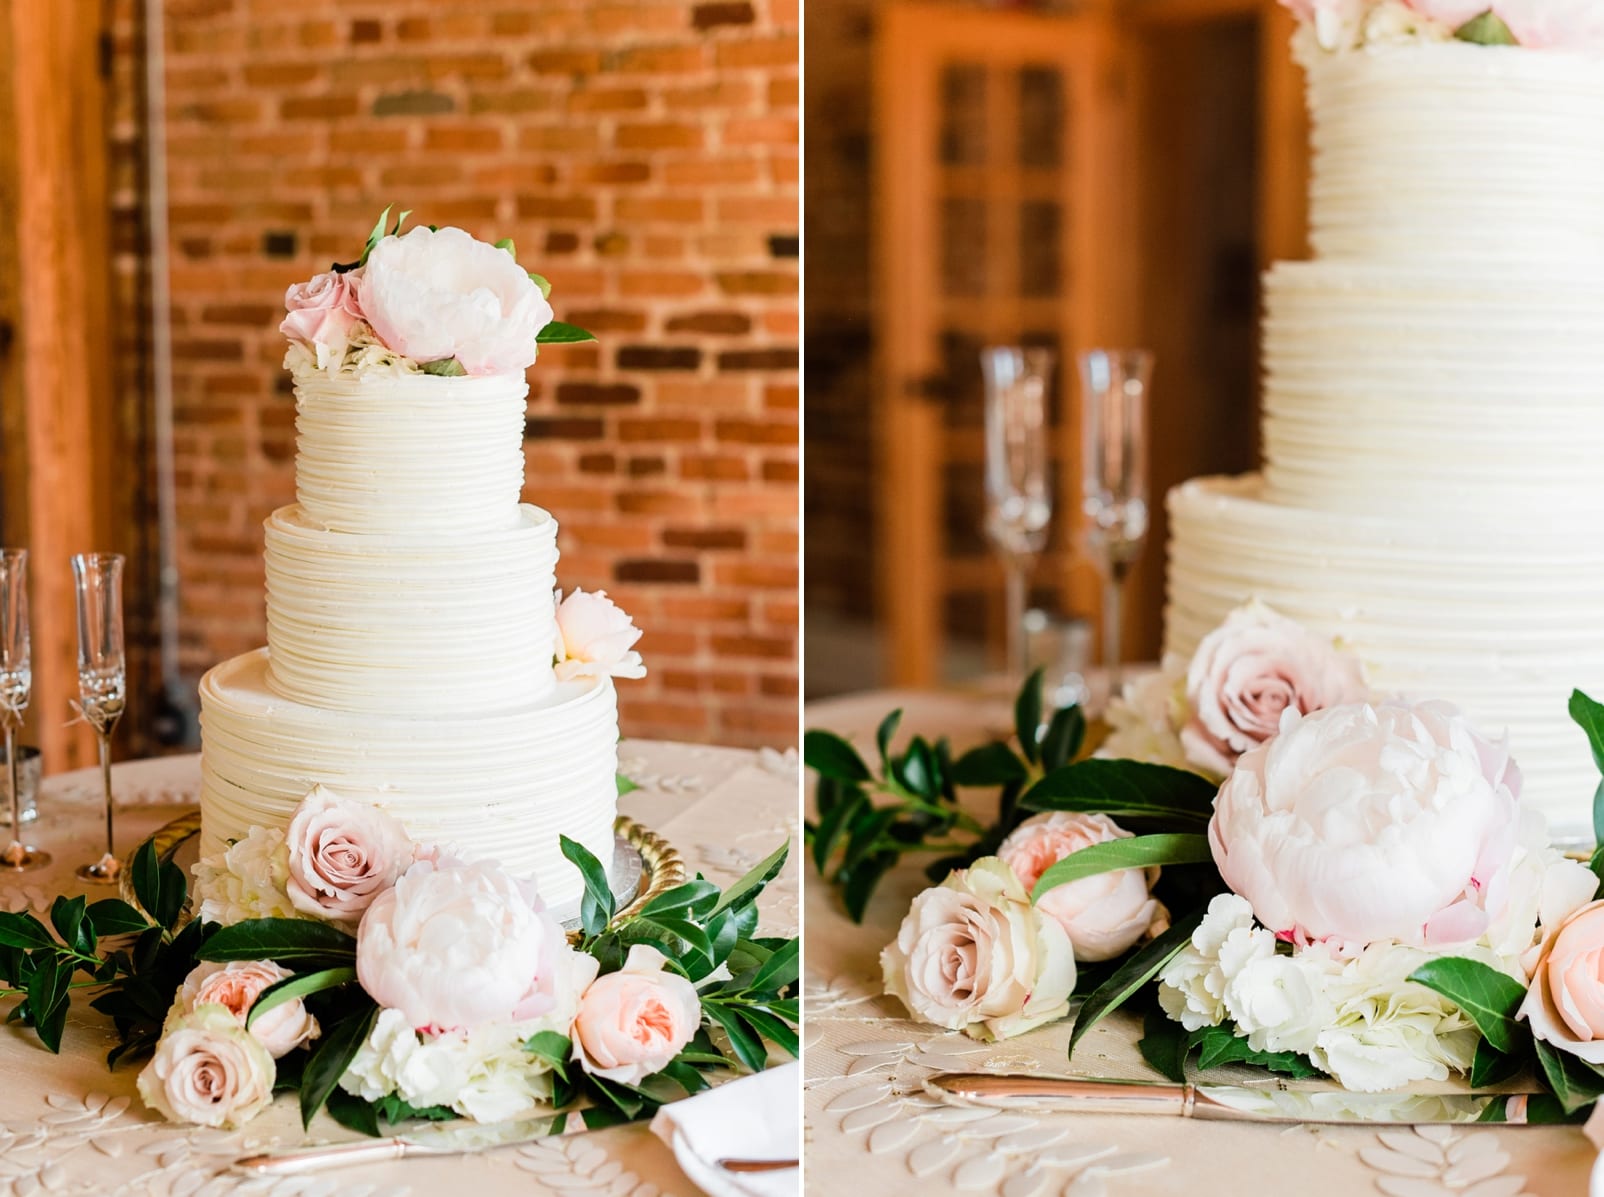 Publix white wedding cake surrounded by fresh flowers in front an exposed red brick wall photo